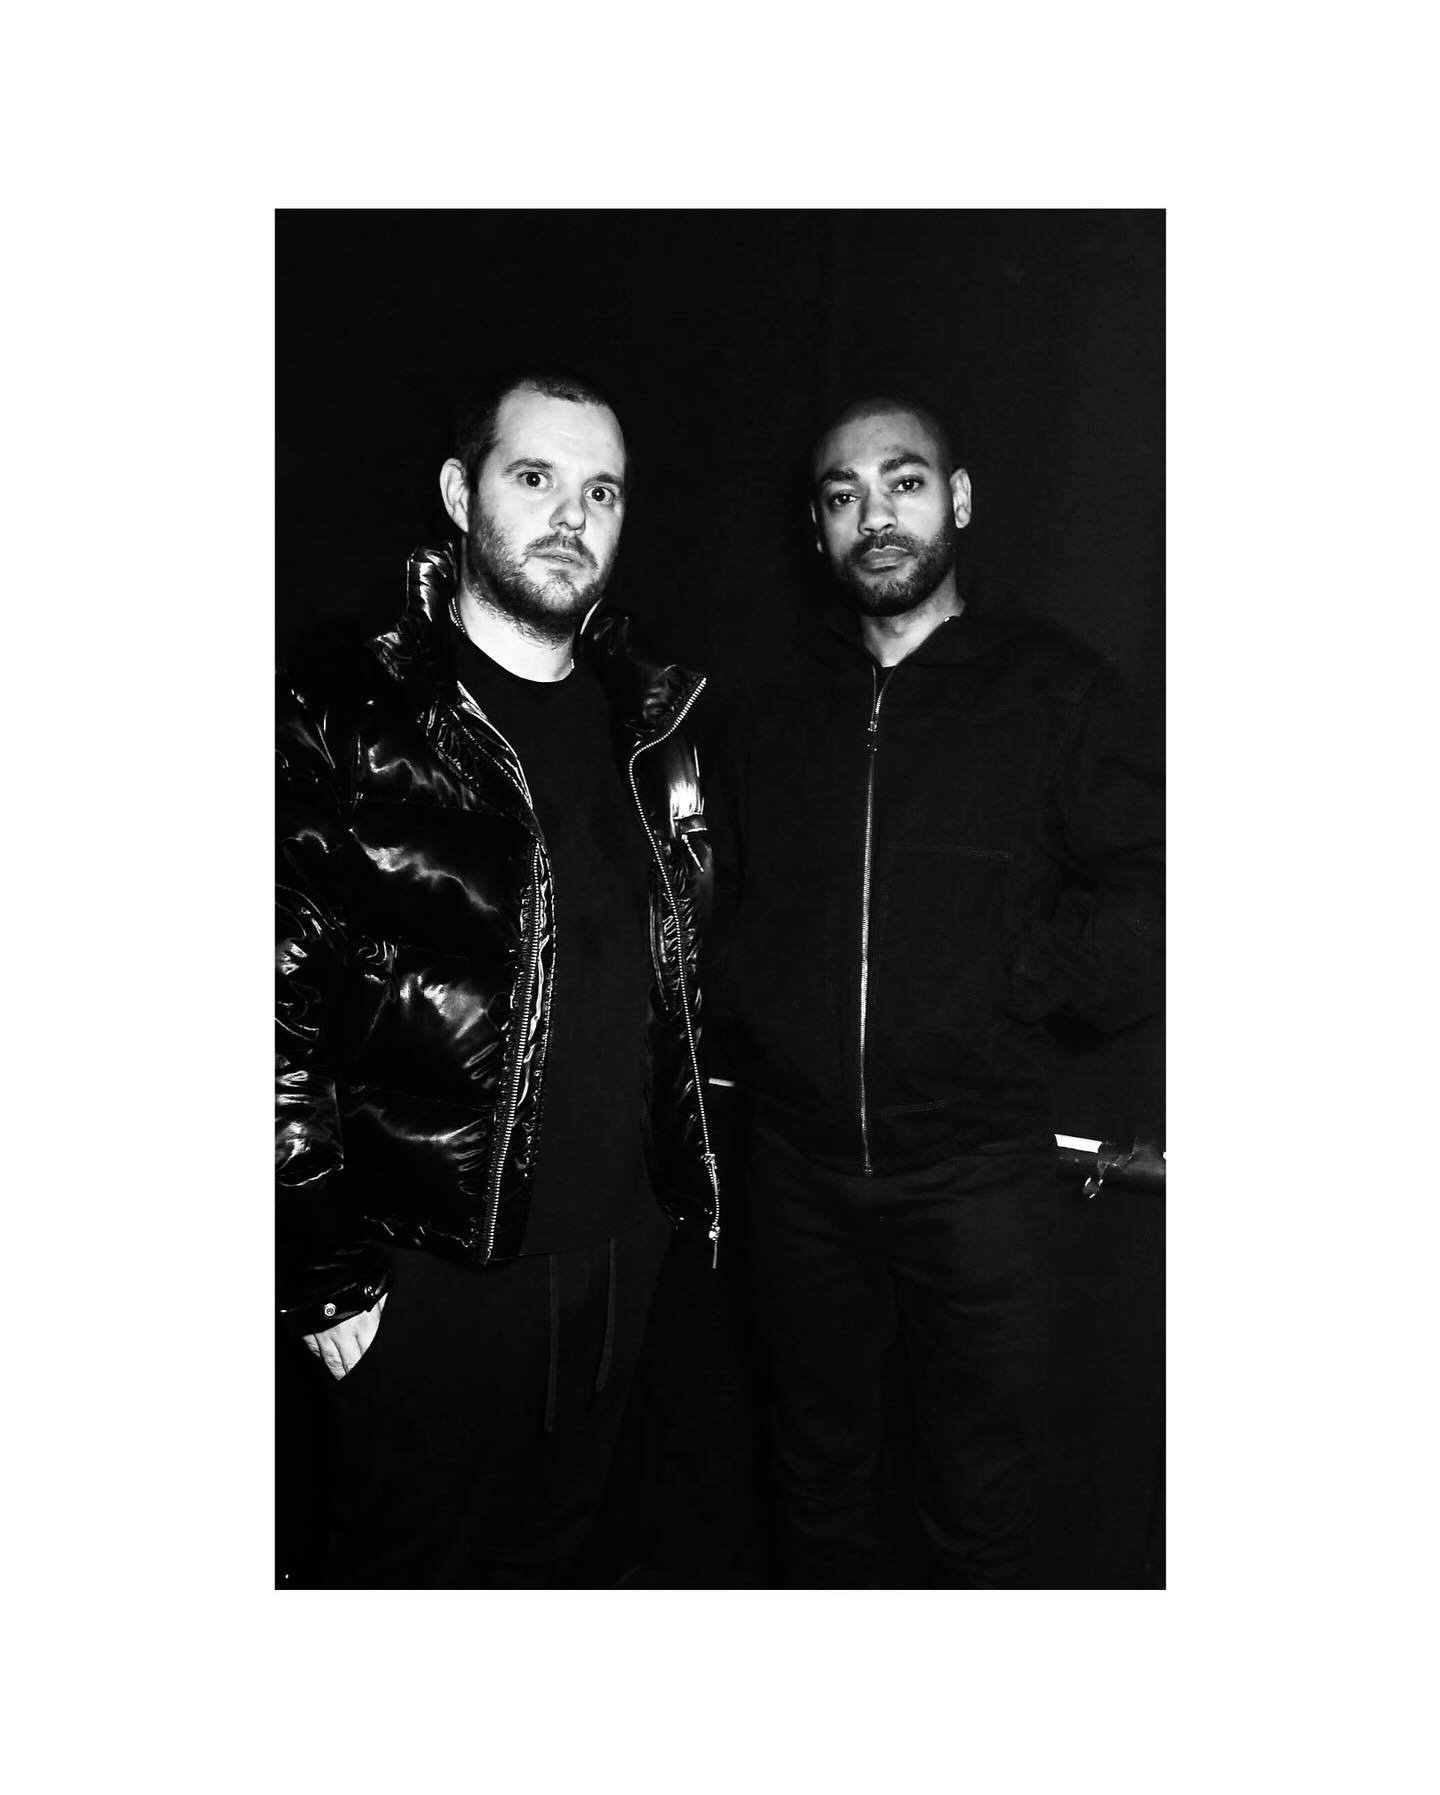 @mikeskinnerltd @therealkano at The @americanexpressuk Gold Unsigned November on 30th Showcase. Amex Gold Unsigned is an initiative to support unsigned, emerging musical  artists and grassroots venues. #kendalandpartners